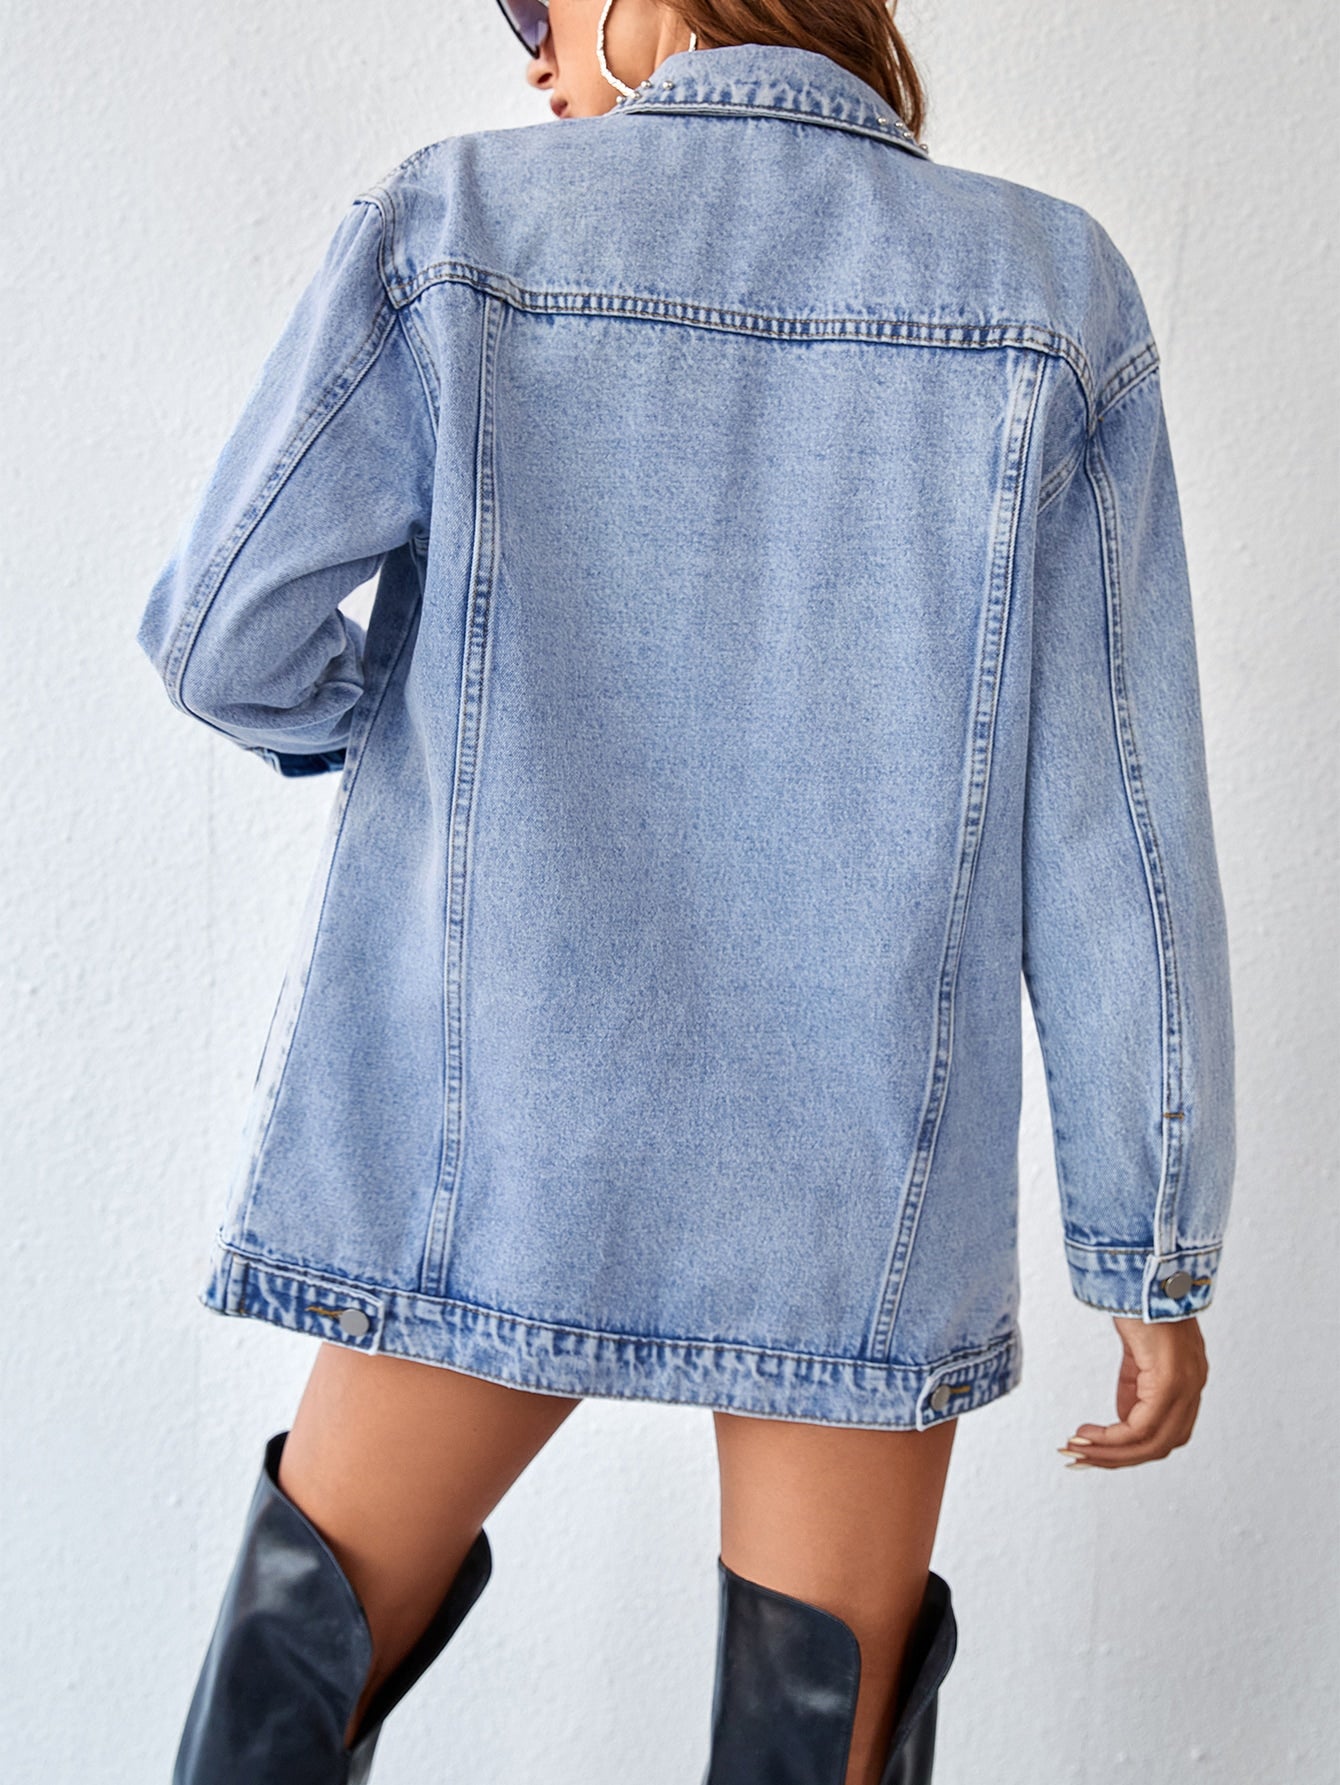 Edgy Elegance: Ripped Drop Shoulder Denim Coat with Pearls Beaded Detail